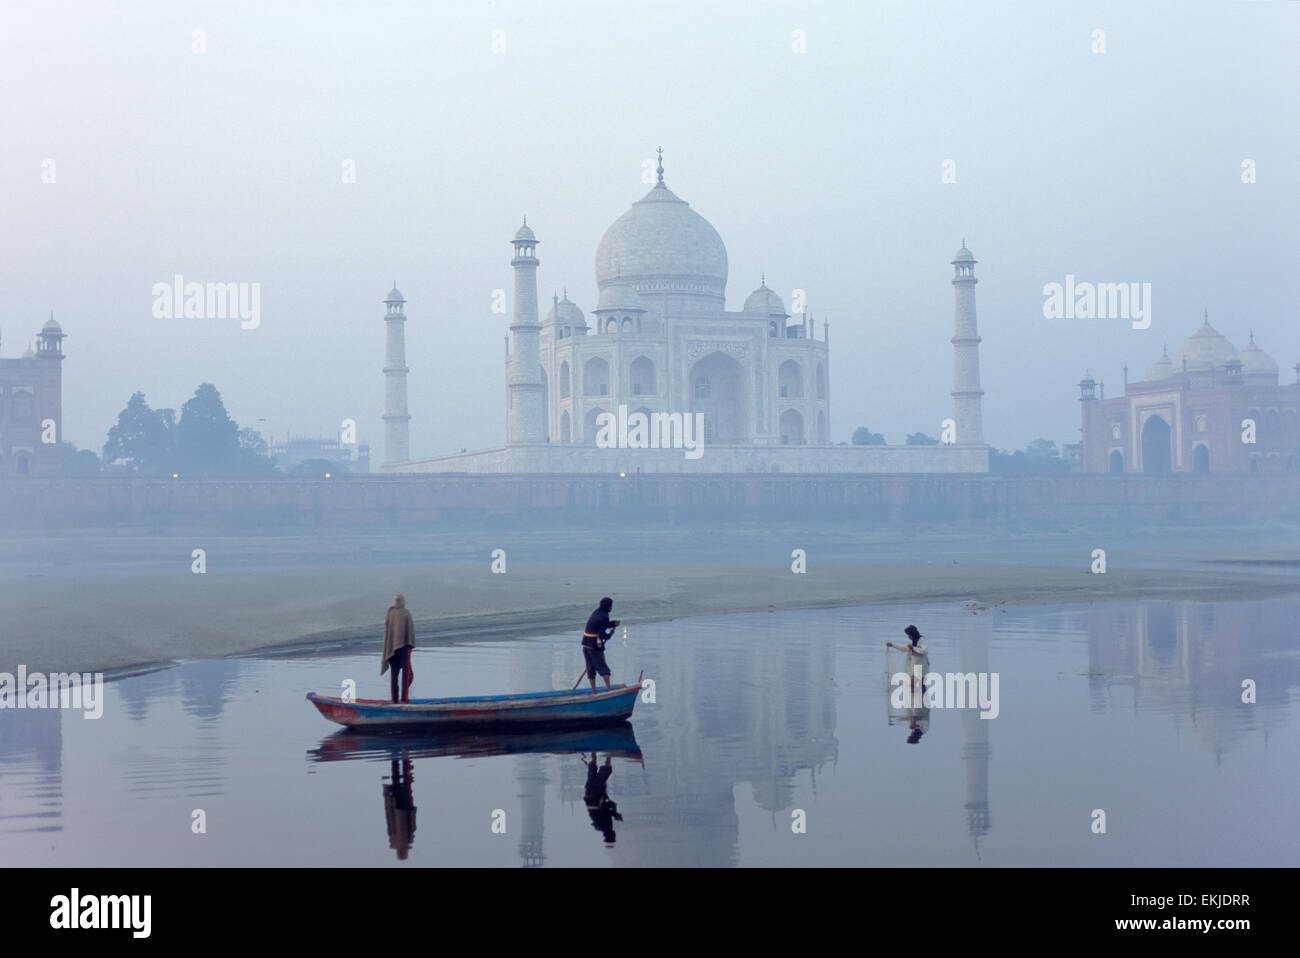 Man fishing next to a ferry boat in the Yamuna River, with the Taj Mahal behind, Agra, Uttar Pradesh, India Stock Photo